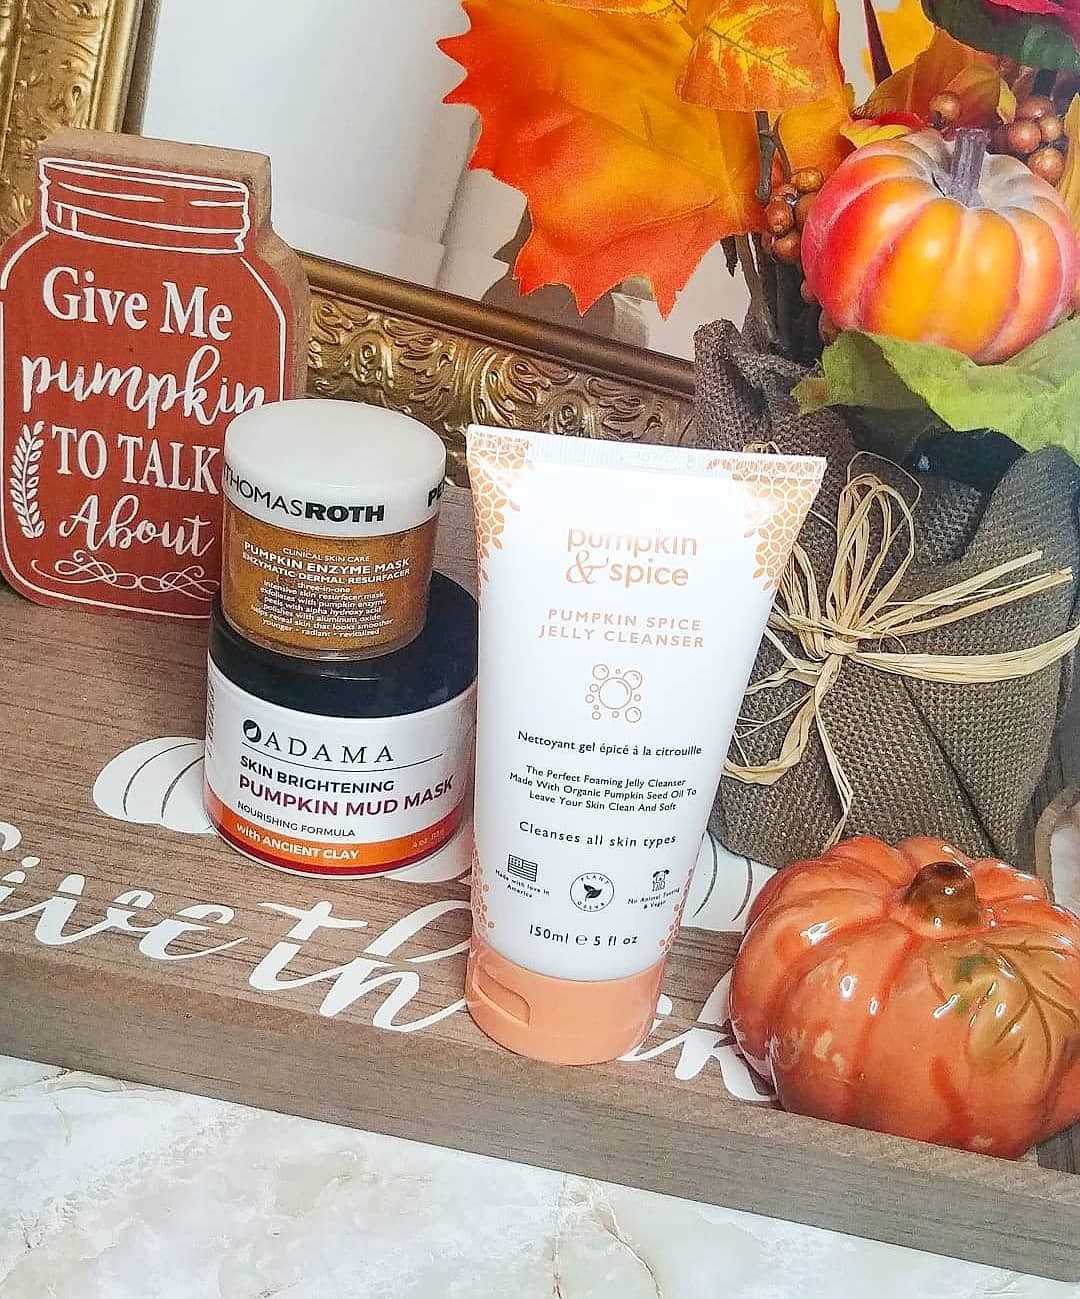 zion health - “Well it's officially FALL time, yay for pumpkin season, sweaters and coziness. Sharing some "early" #friyayfaves fall favorites” - @lexlovesmakeup_
📸: @lexlovesmakeup_
---
What are some...